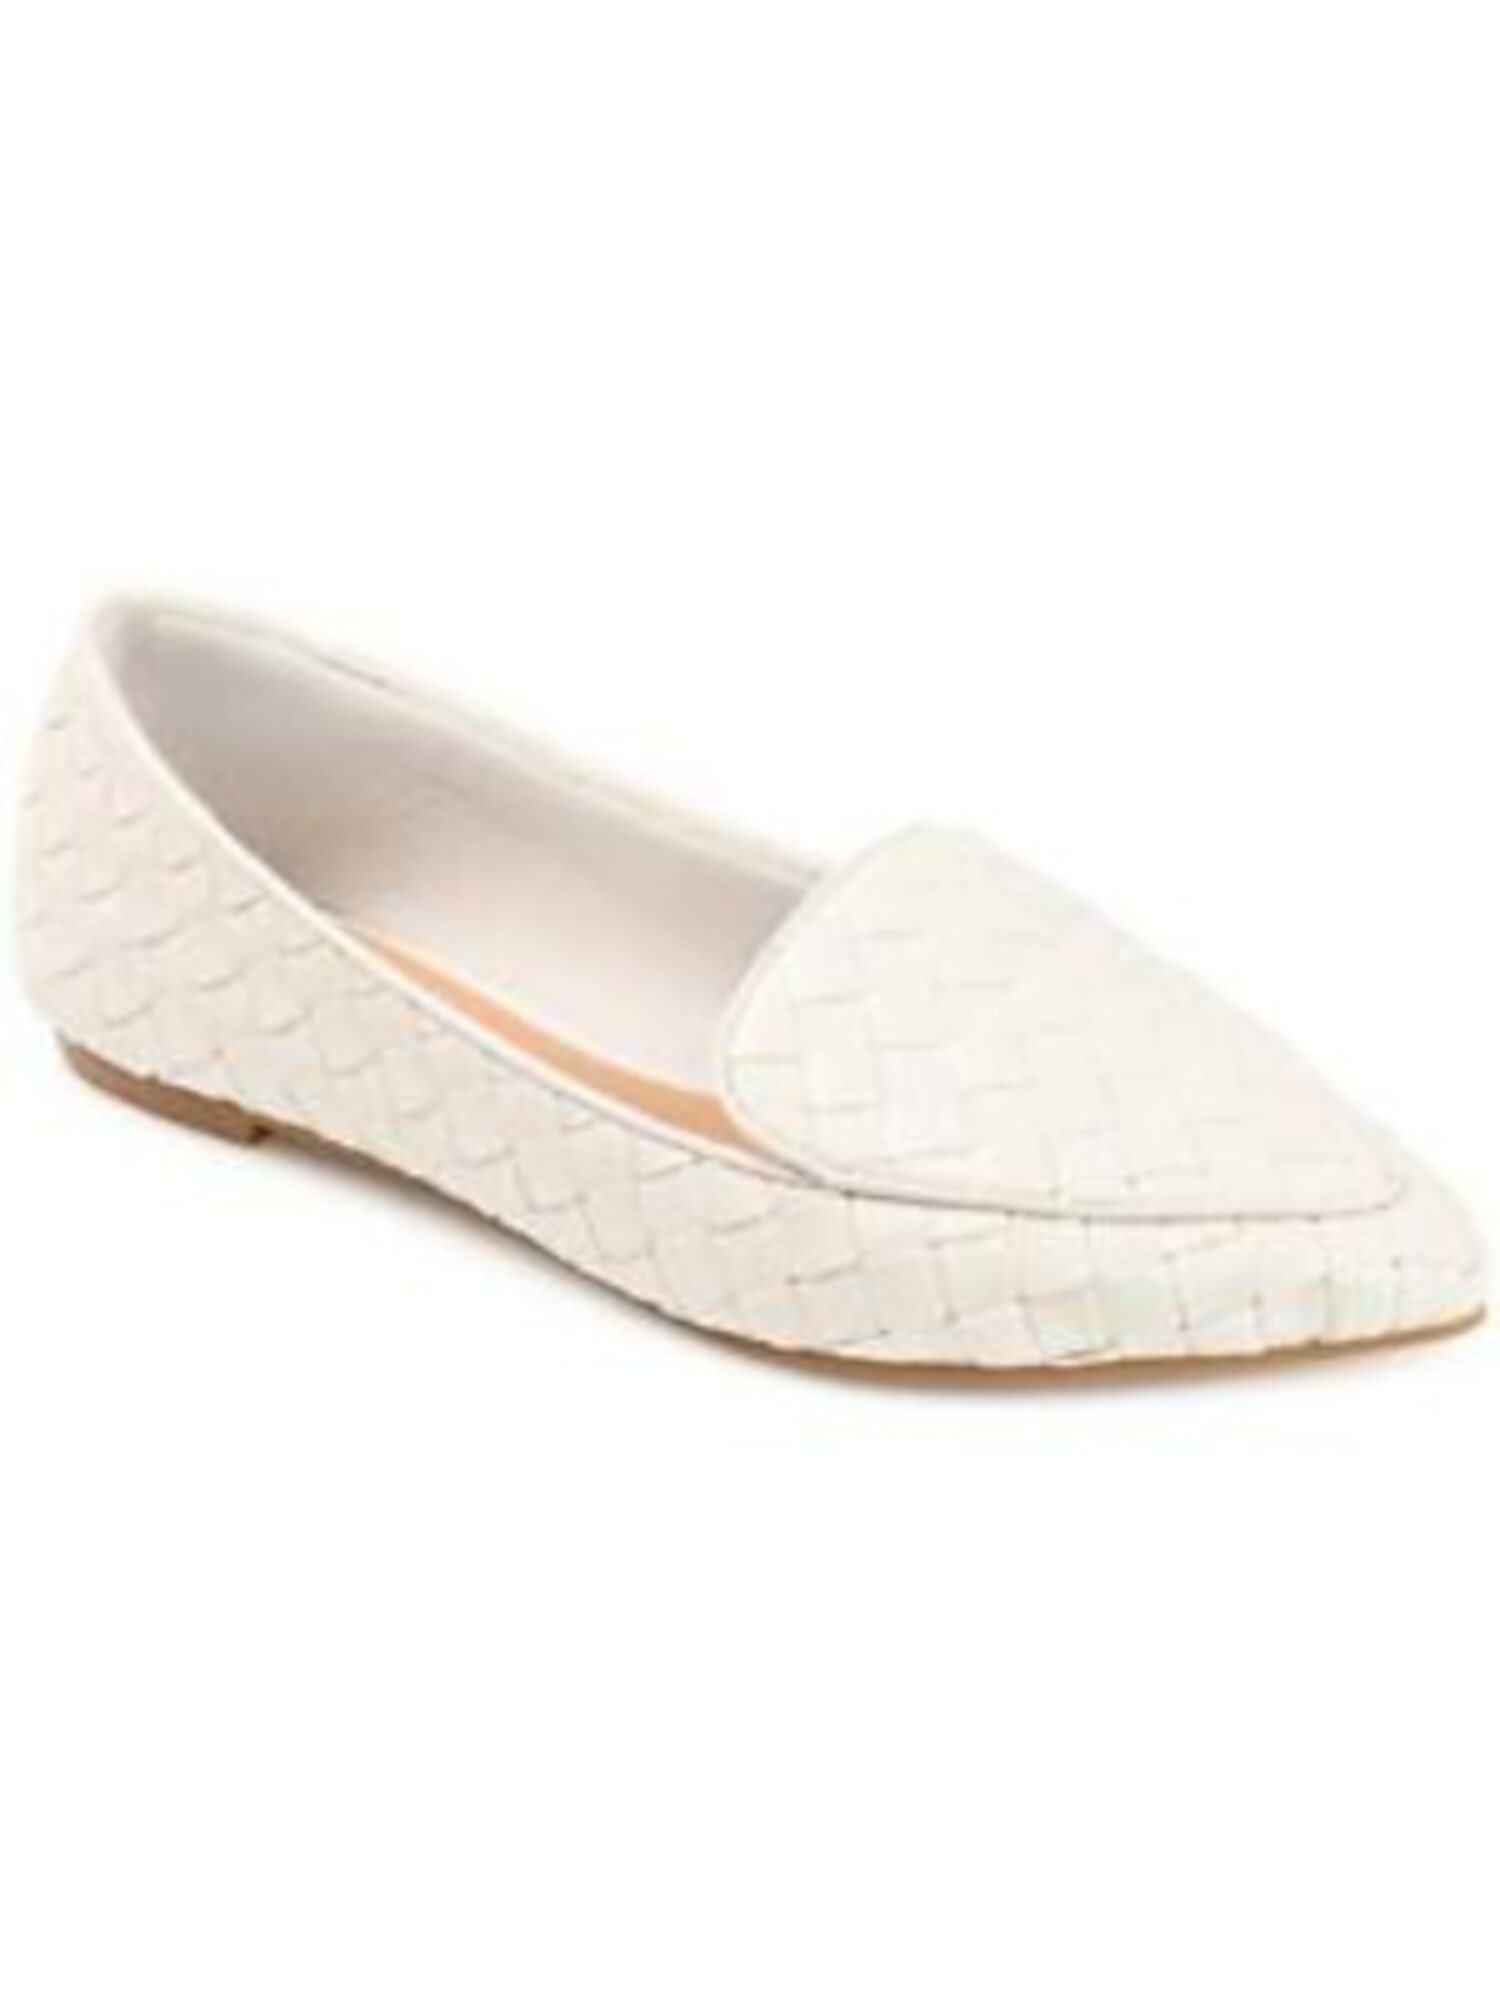 JOURNEE COLLECTION Womens White Ivory Woven Notch Cutouts Misty Pointed Toe Slip On Loafers 7